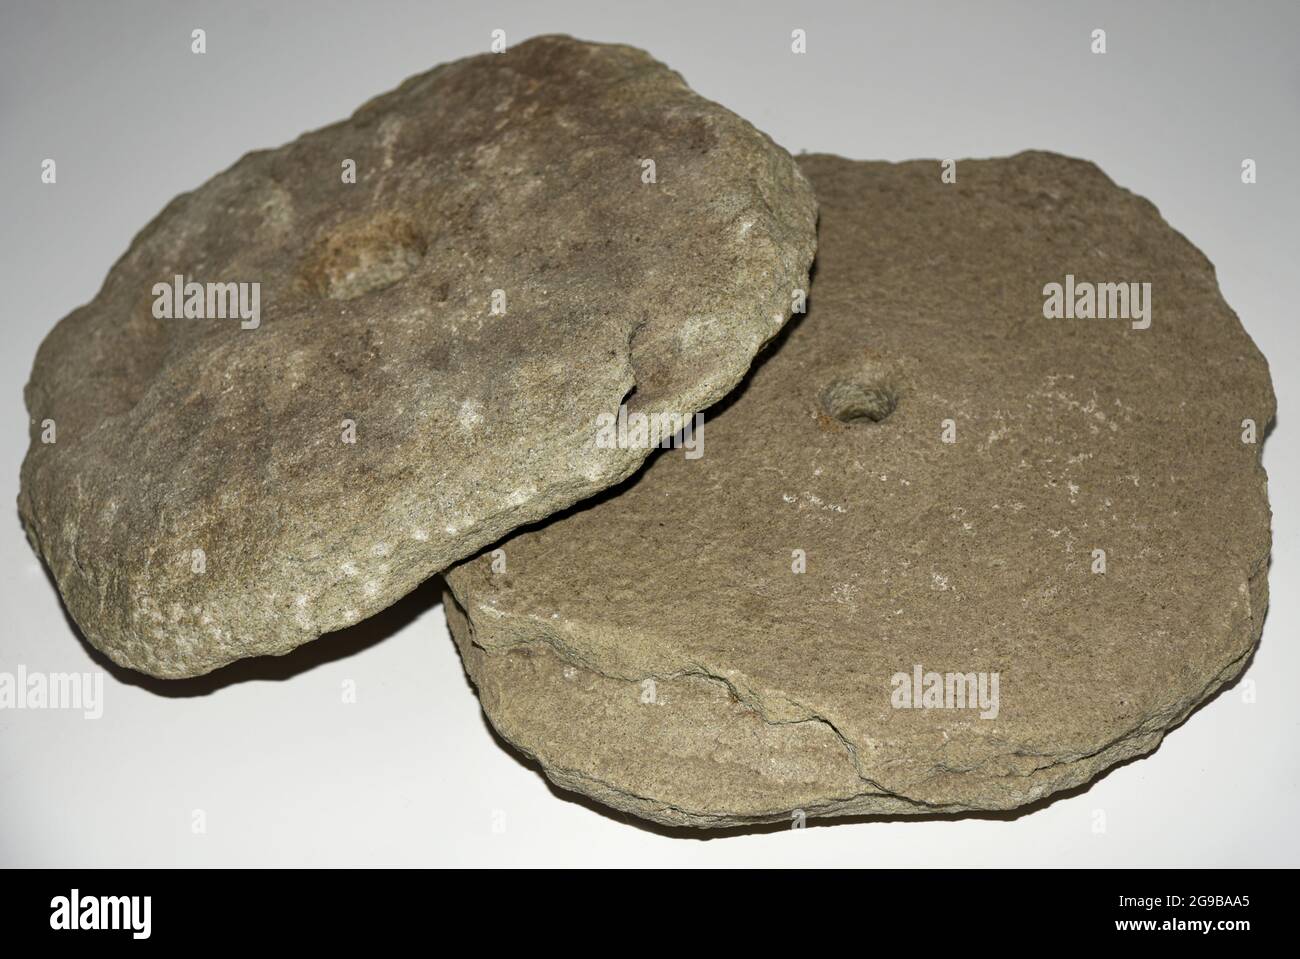 Ancient stone millstones for grinding grain, isolate. Stock Photo